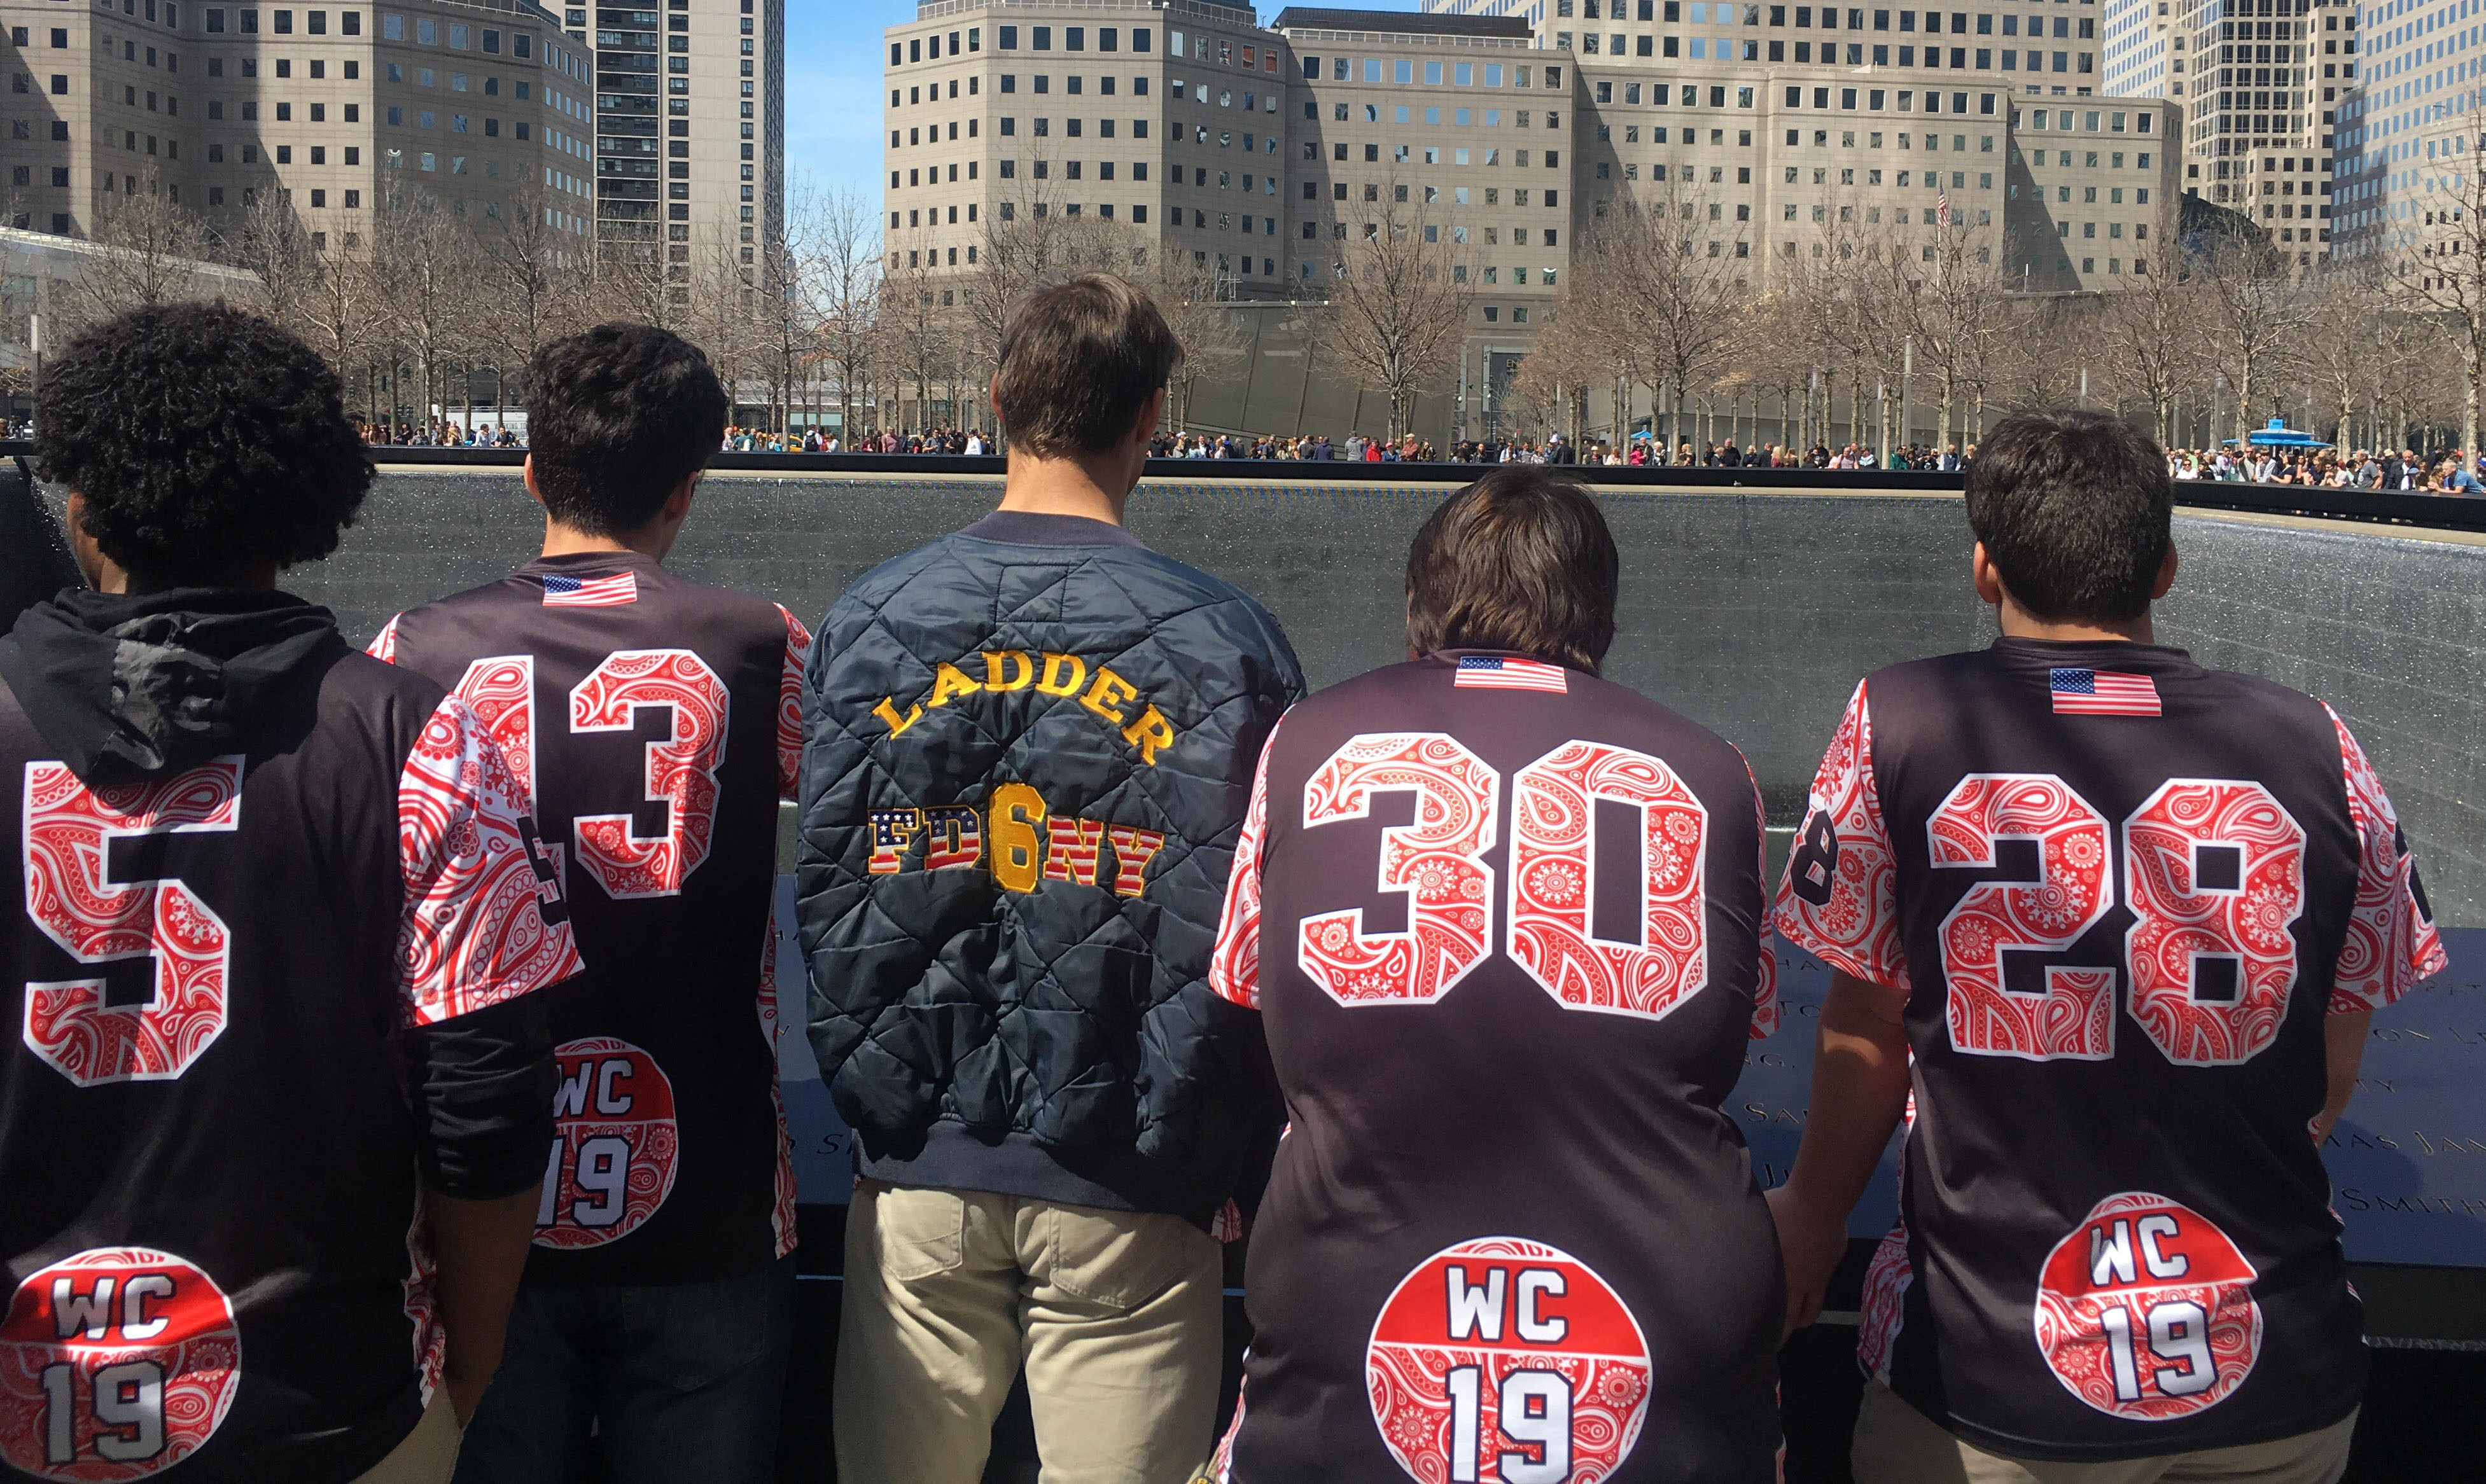 Five members of the Nyack Boys varsity lacrosse team stand beside a reflecting pool at Memorial plaza. They are facing away from the camera as they look down into the pool.